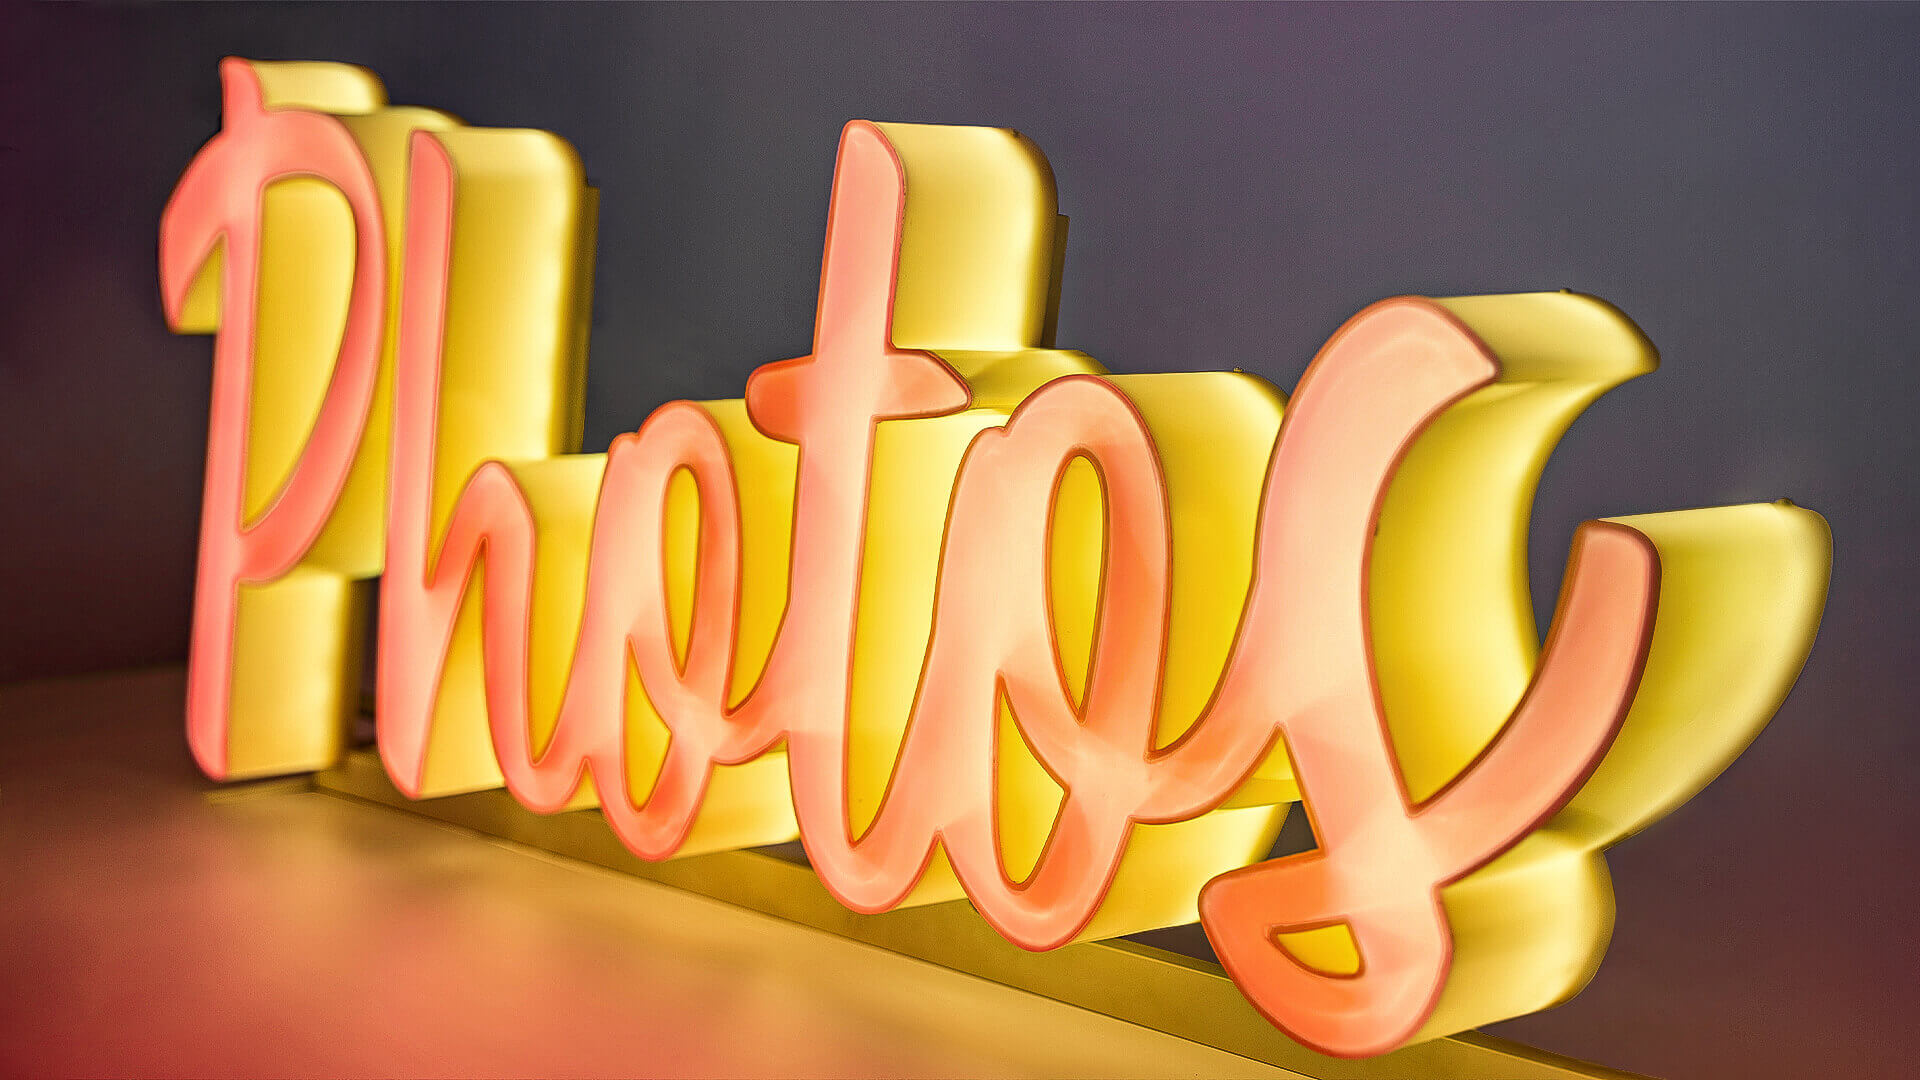 Photos - Plexiglass letters shining on the front and side, in orange.